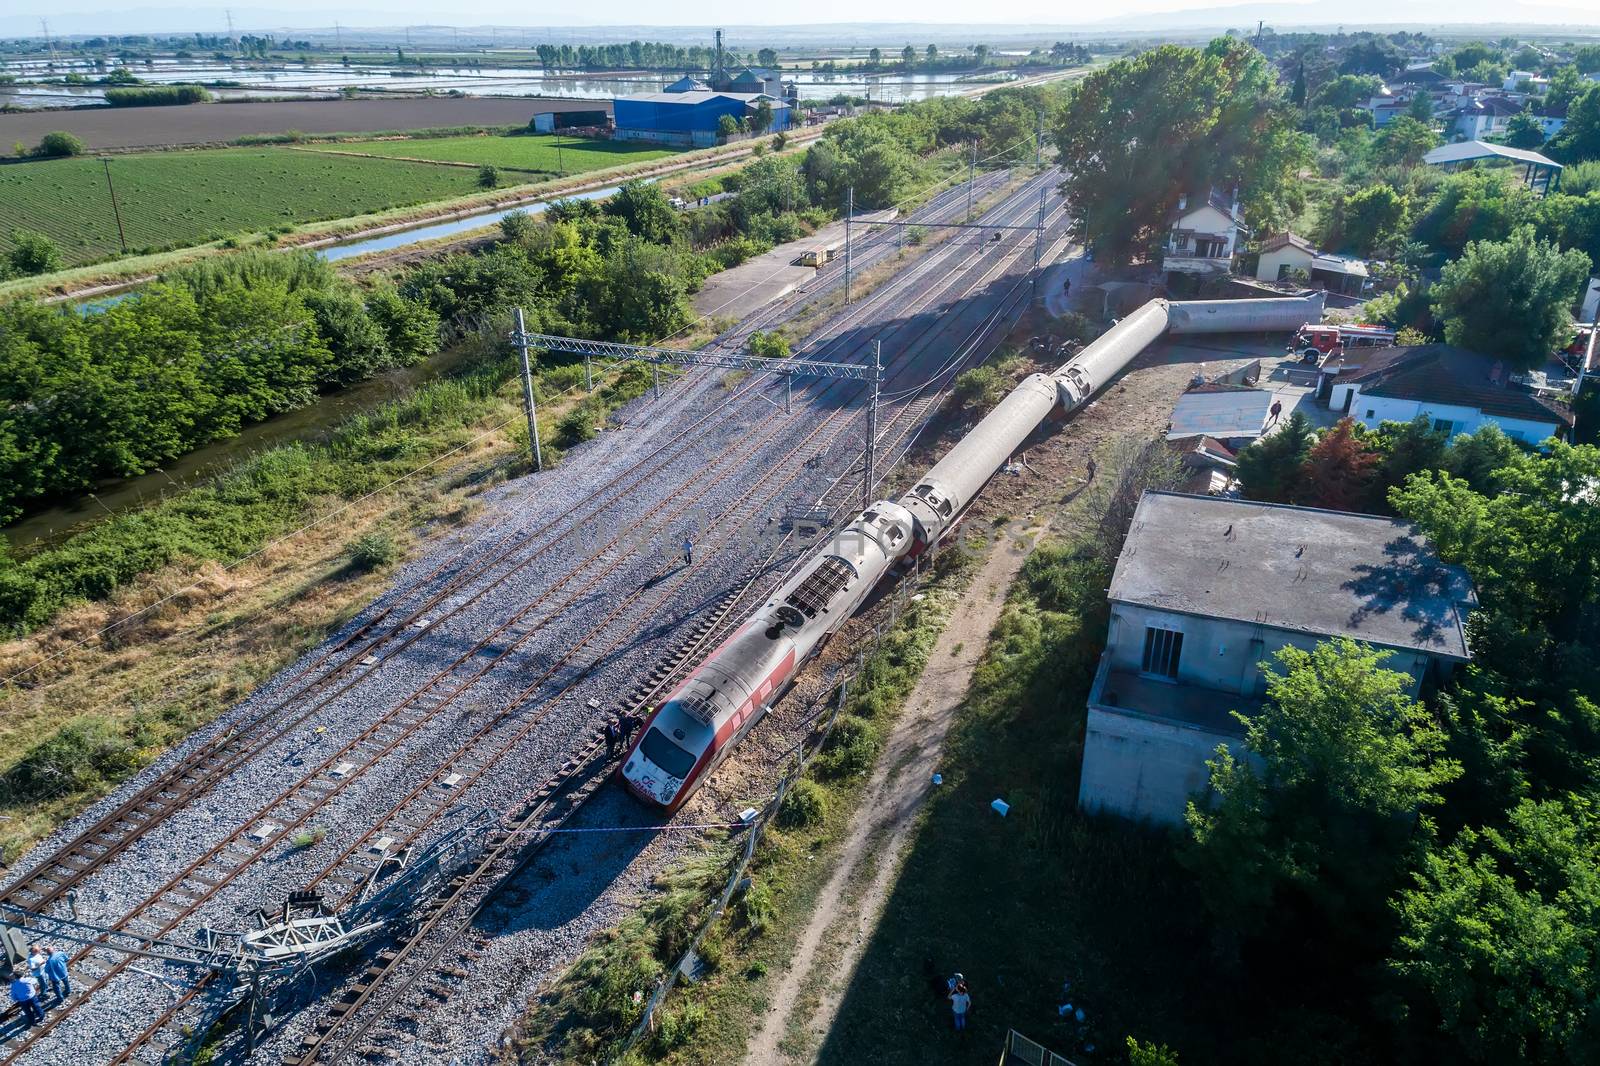 Aerial view of the fatal train derailment by ververidis